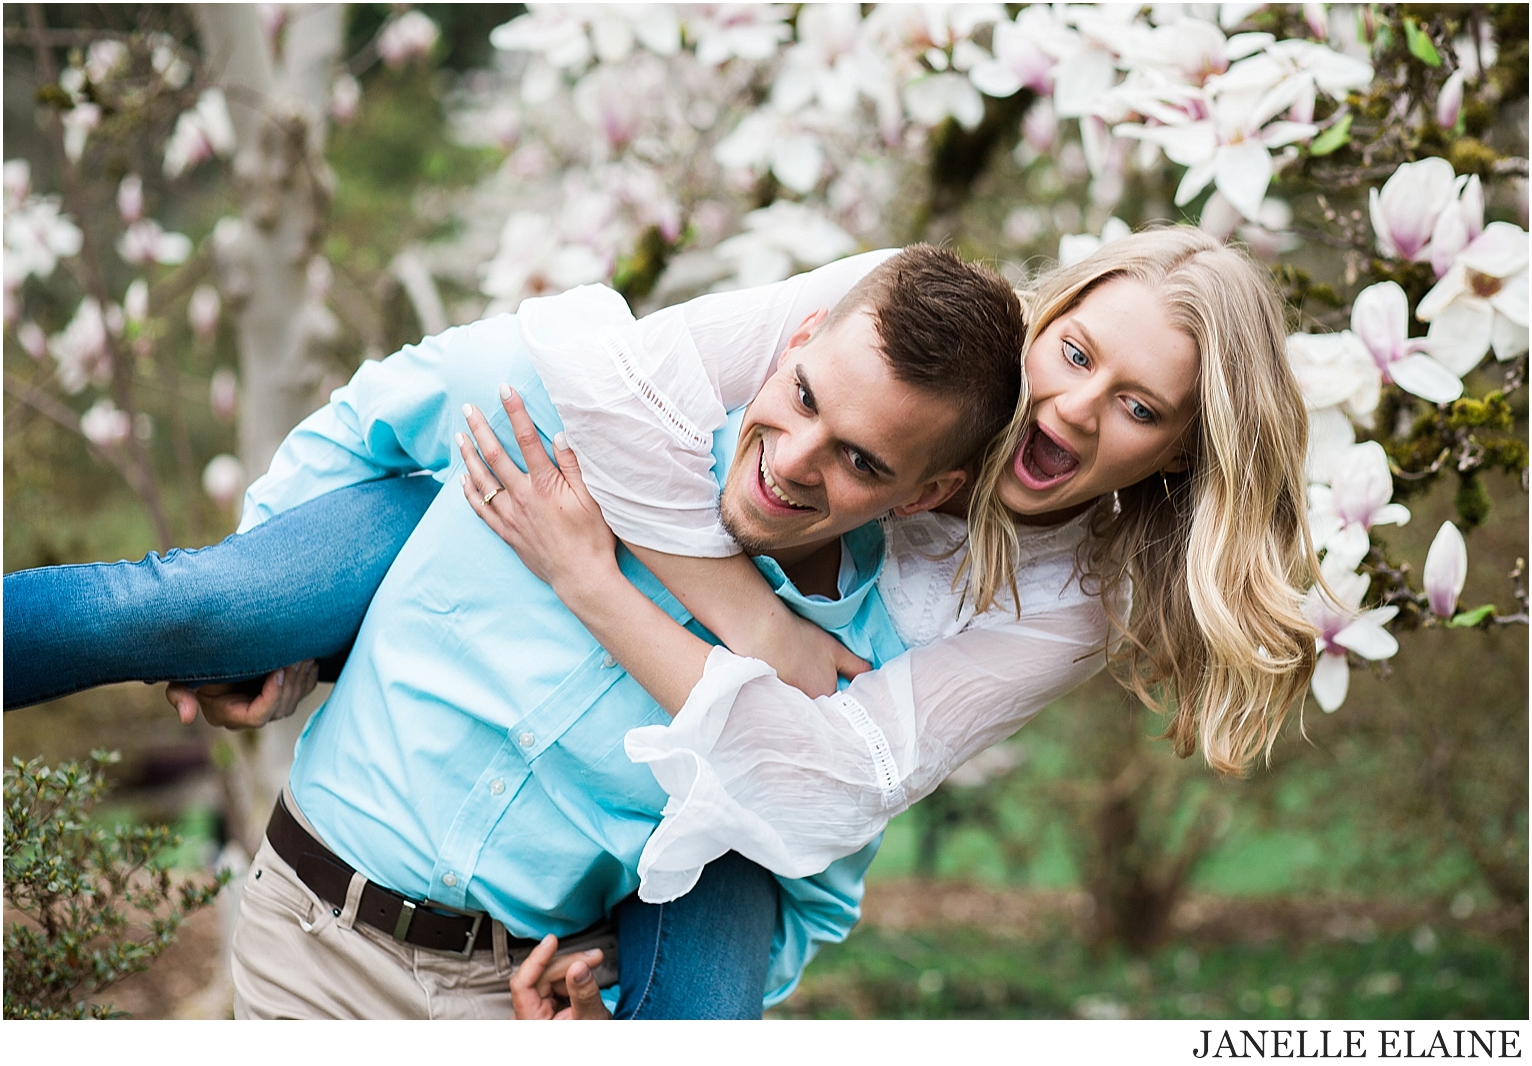 tricia and nate engagement photos-janelle elaine photography-163.jpg